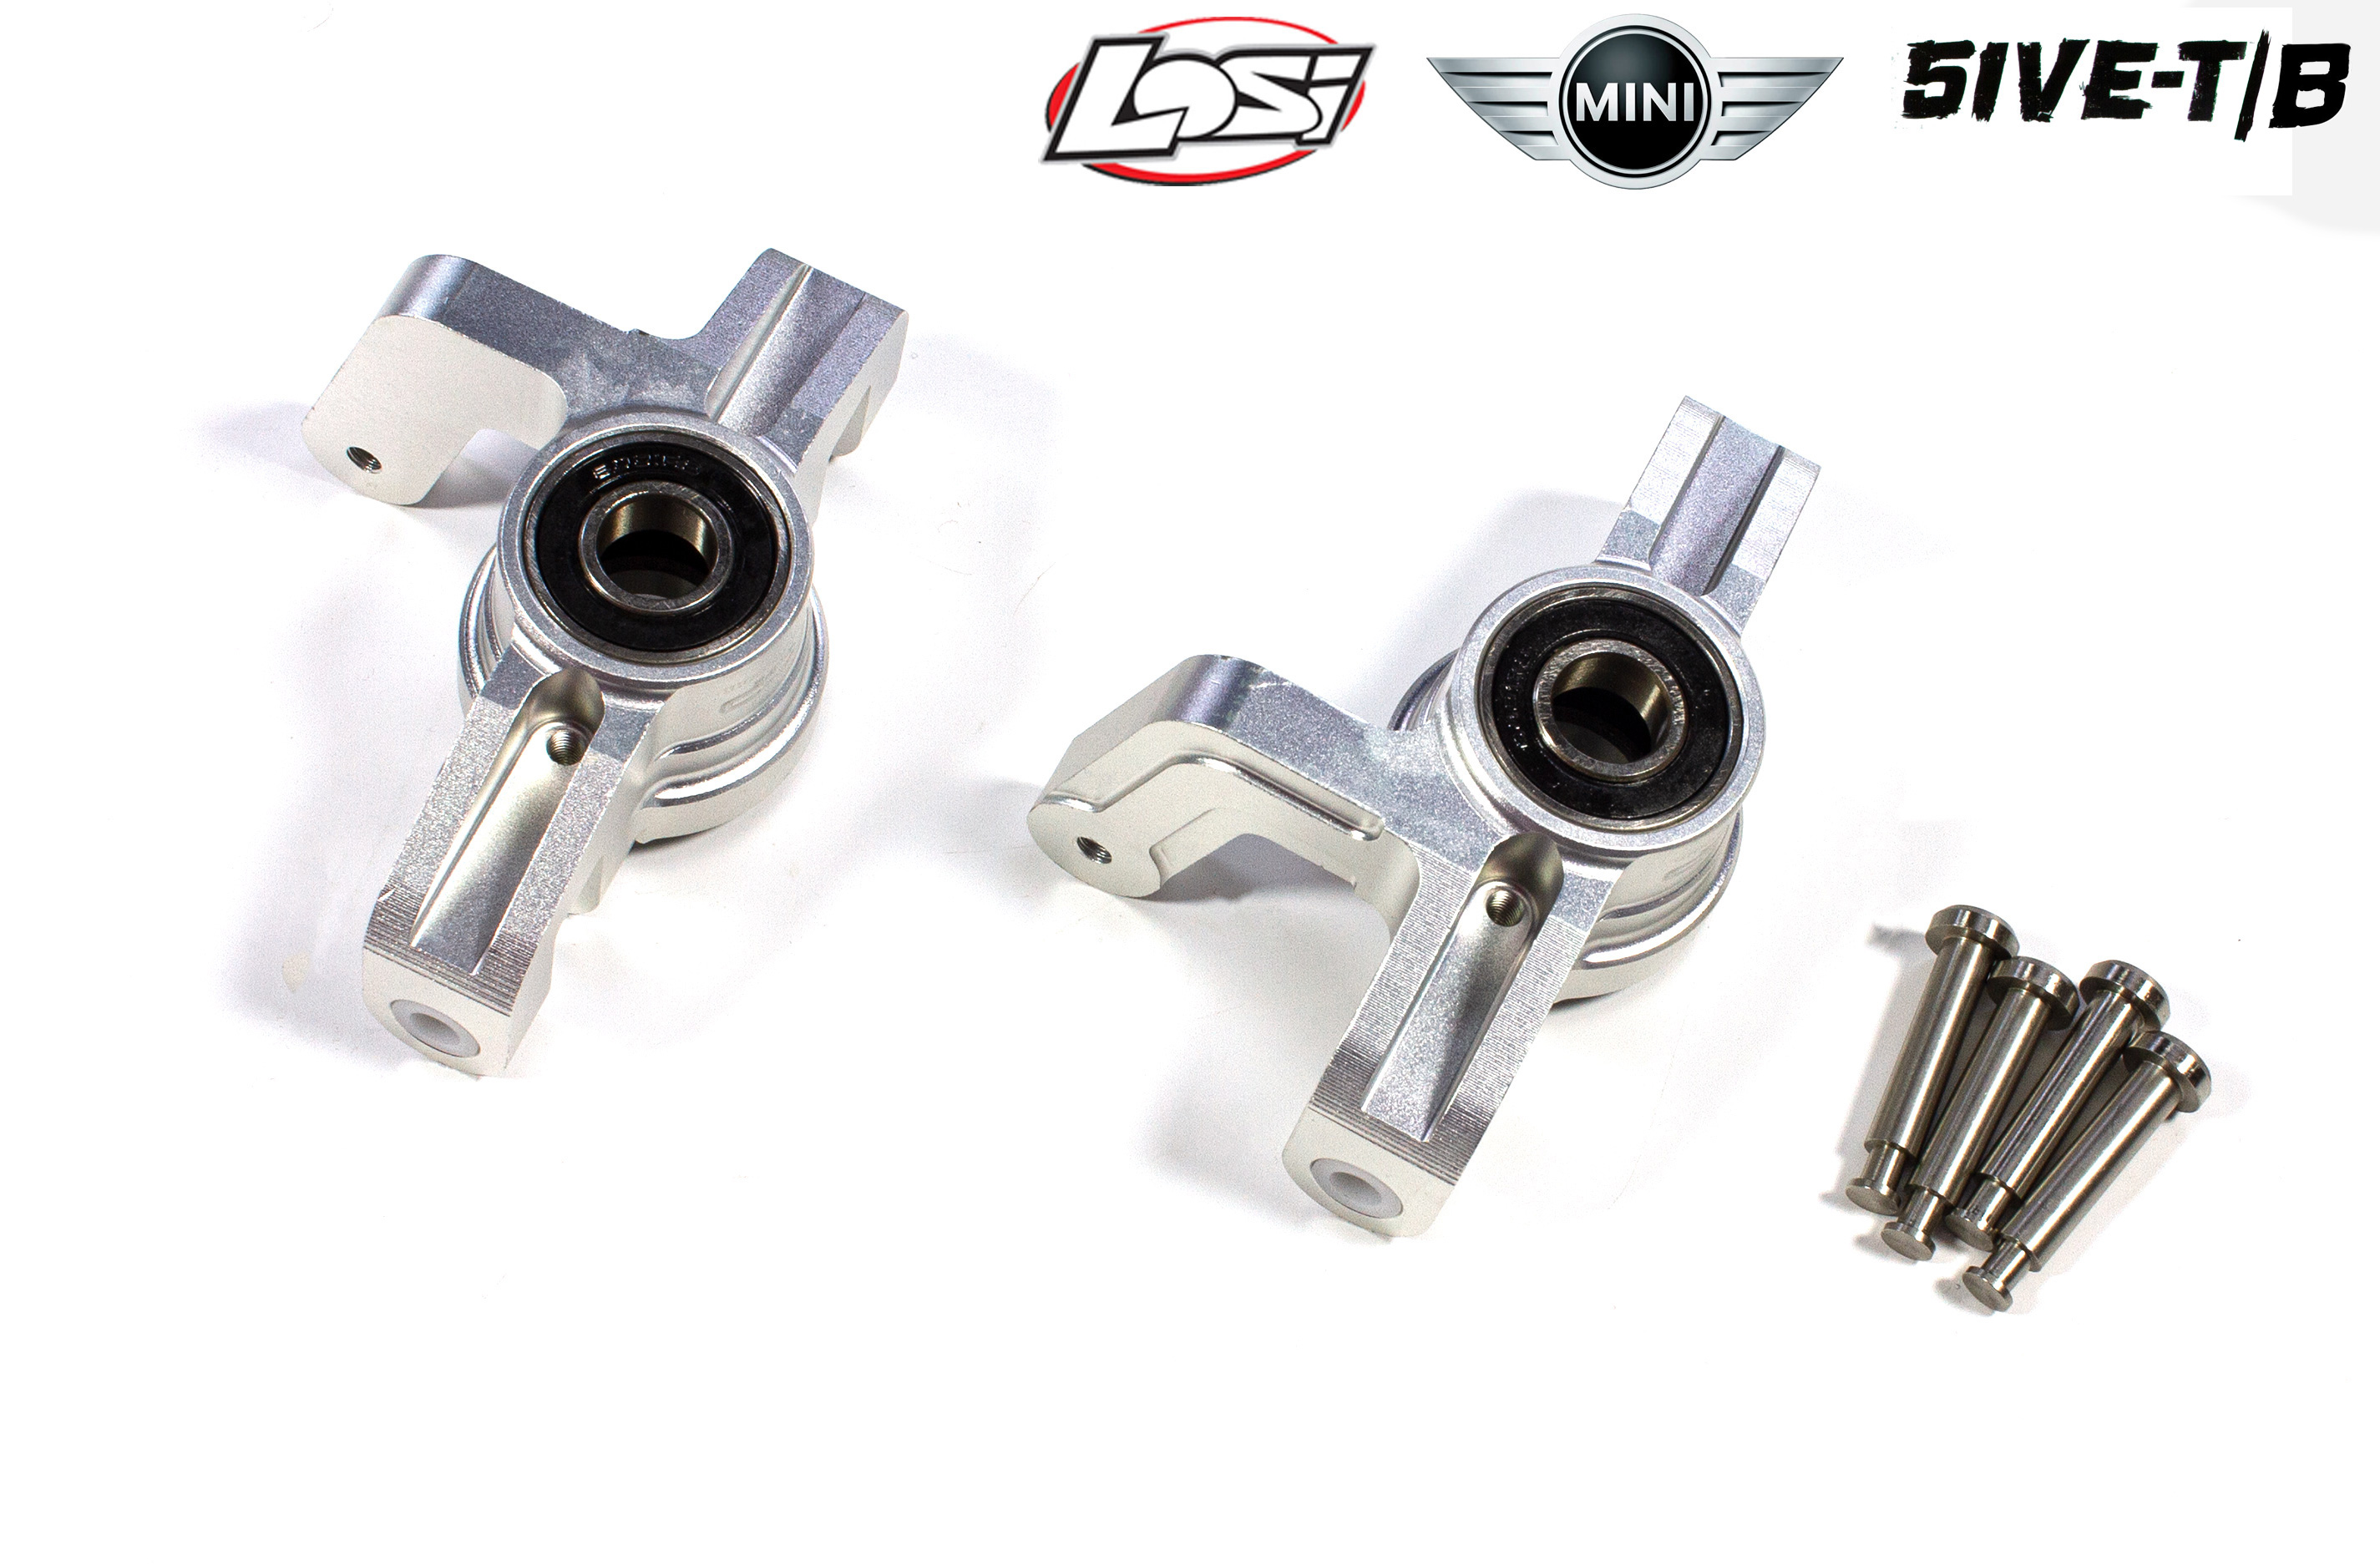 AT-5T026 ATOP Aluminum spindles front for Losi 5ive-T/2.0/B and Mini